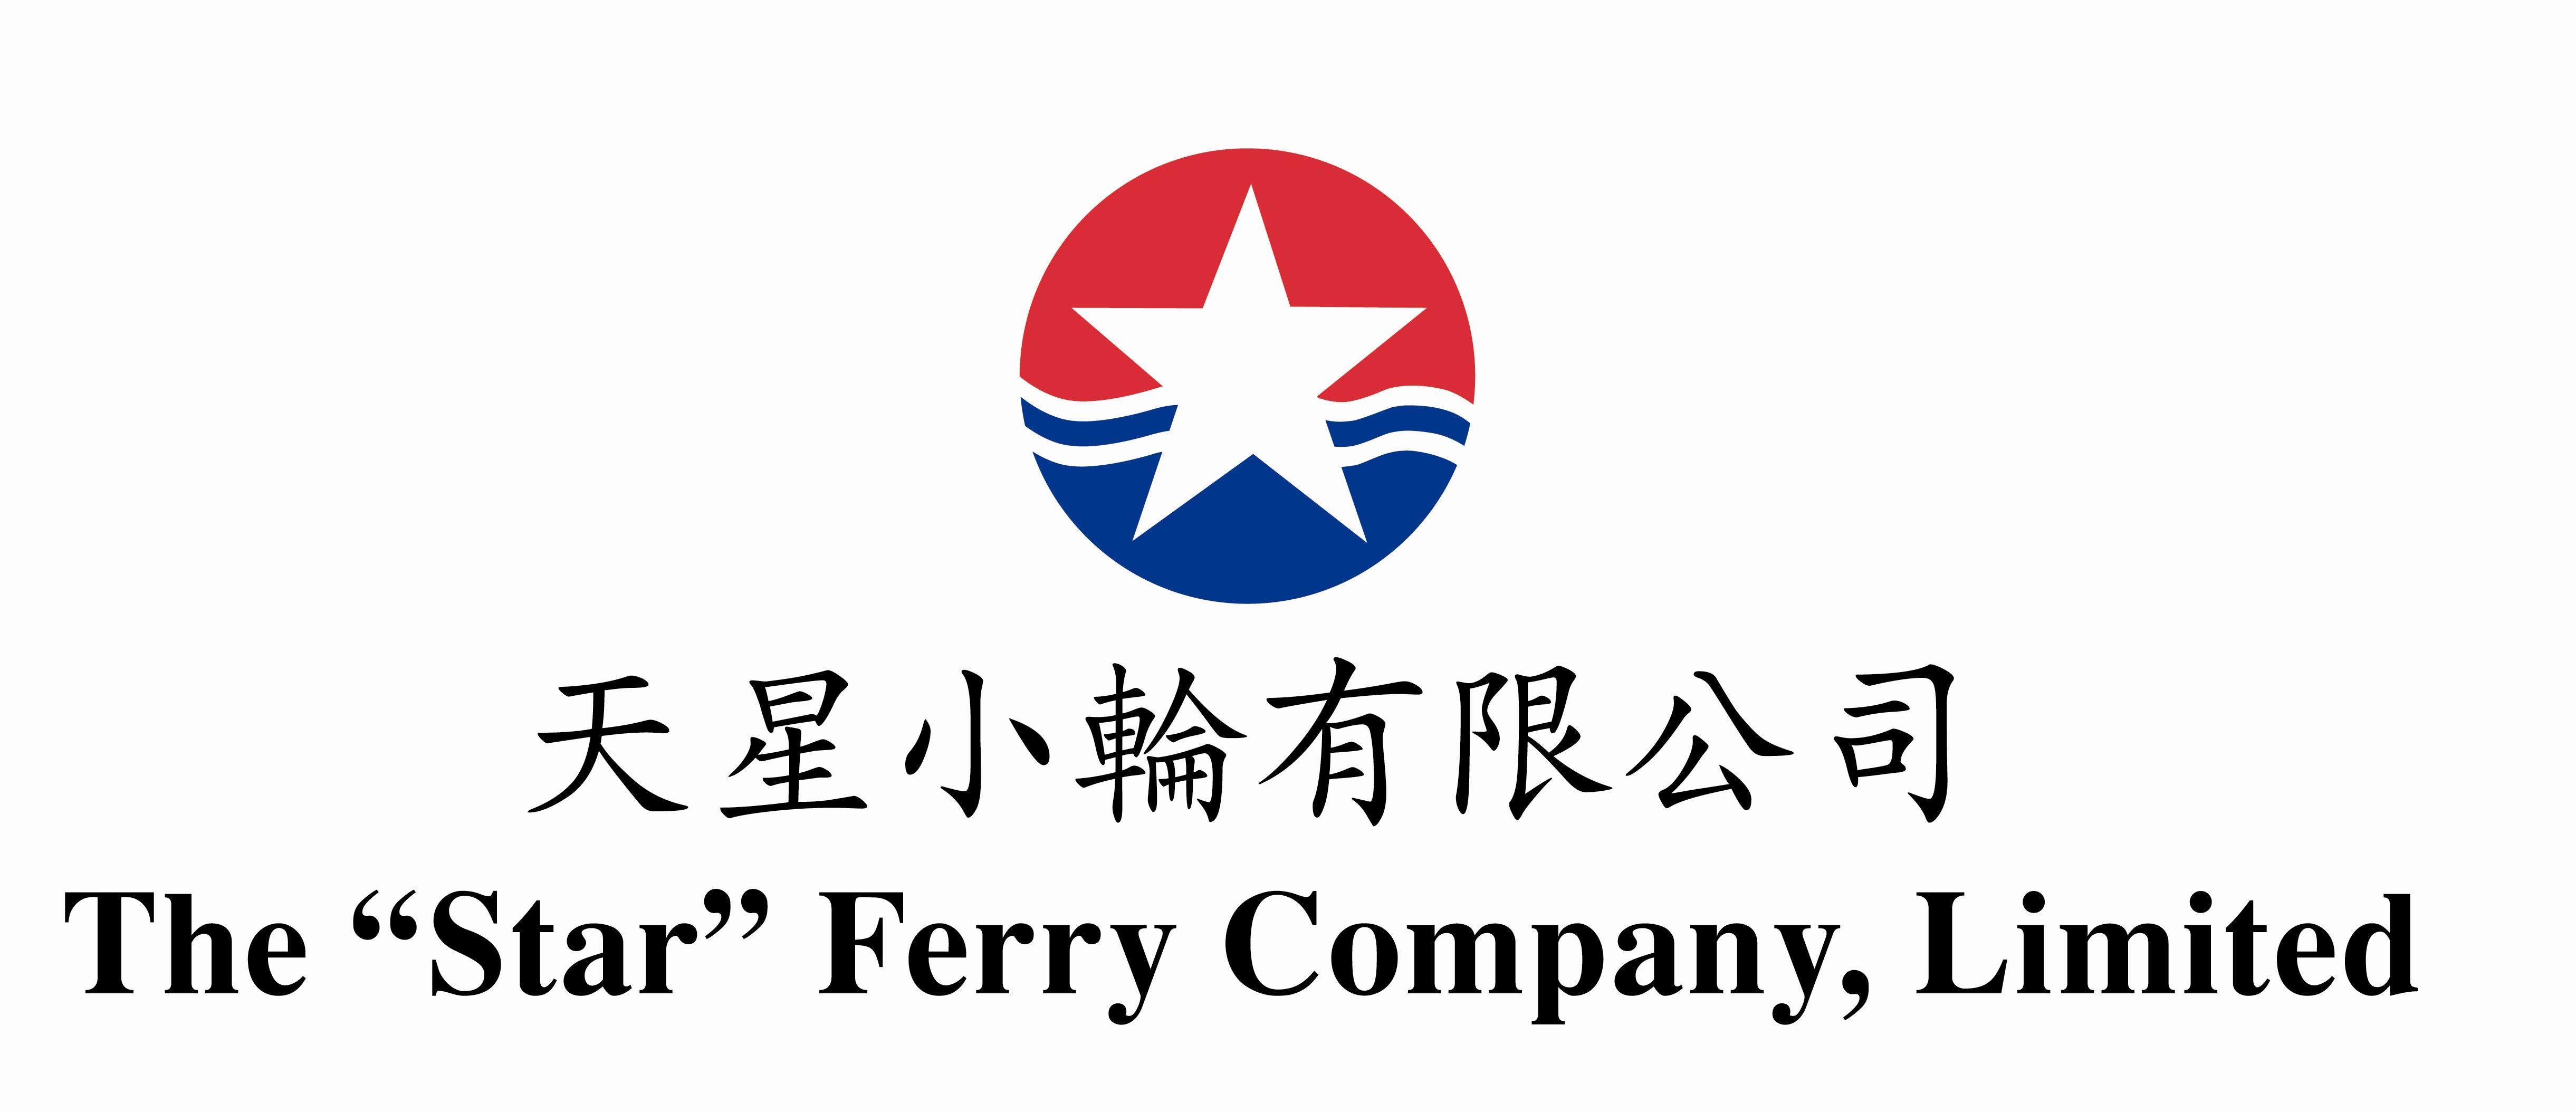 The “Star” Ferry Company, Limited